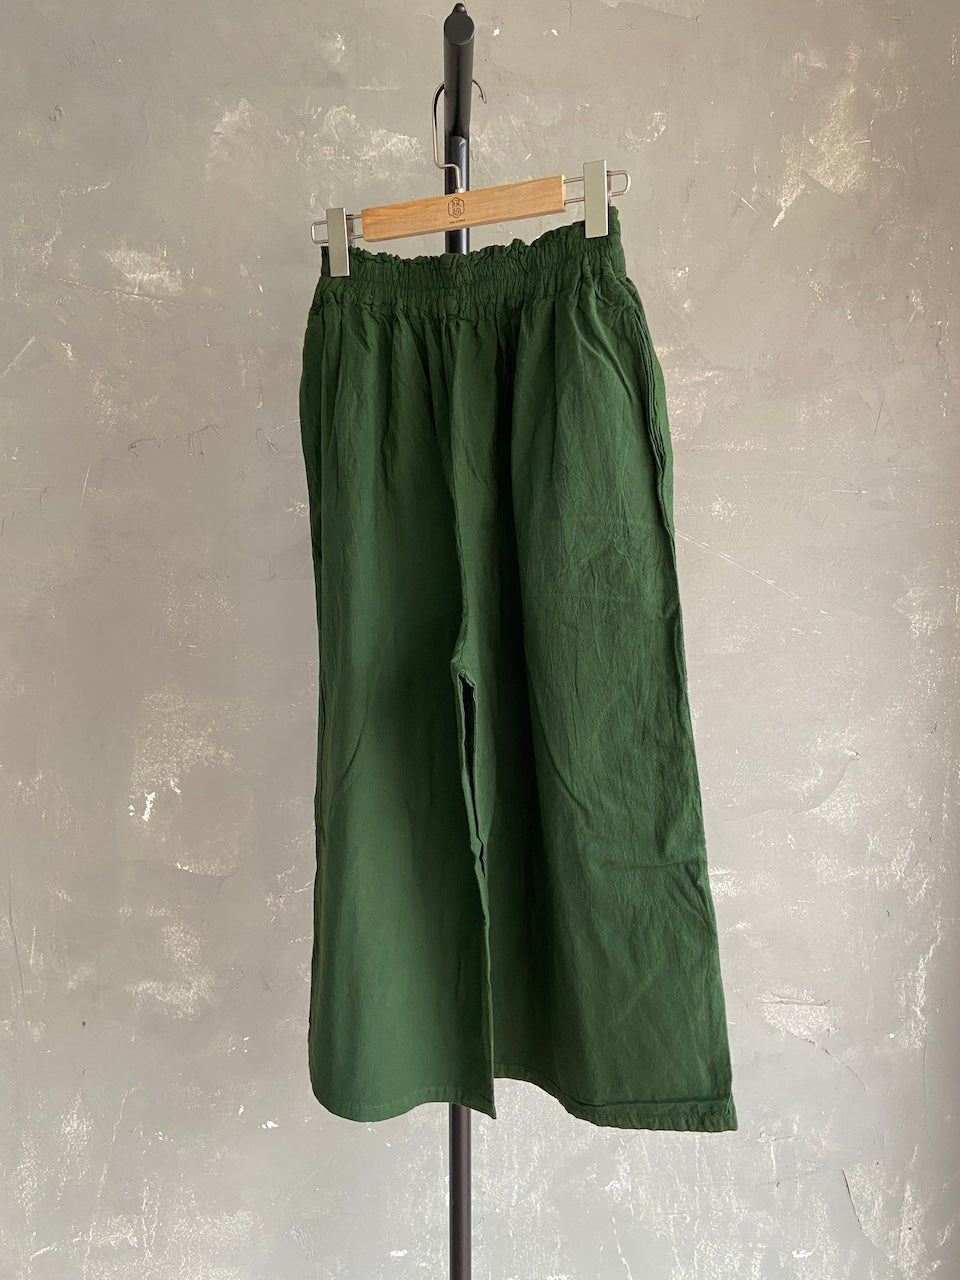 Hand Dyed Farmer's Pants in Army Green